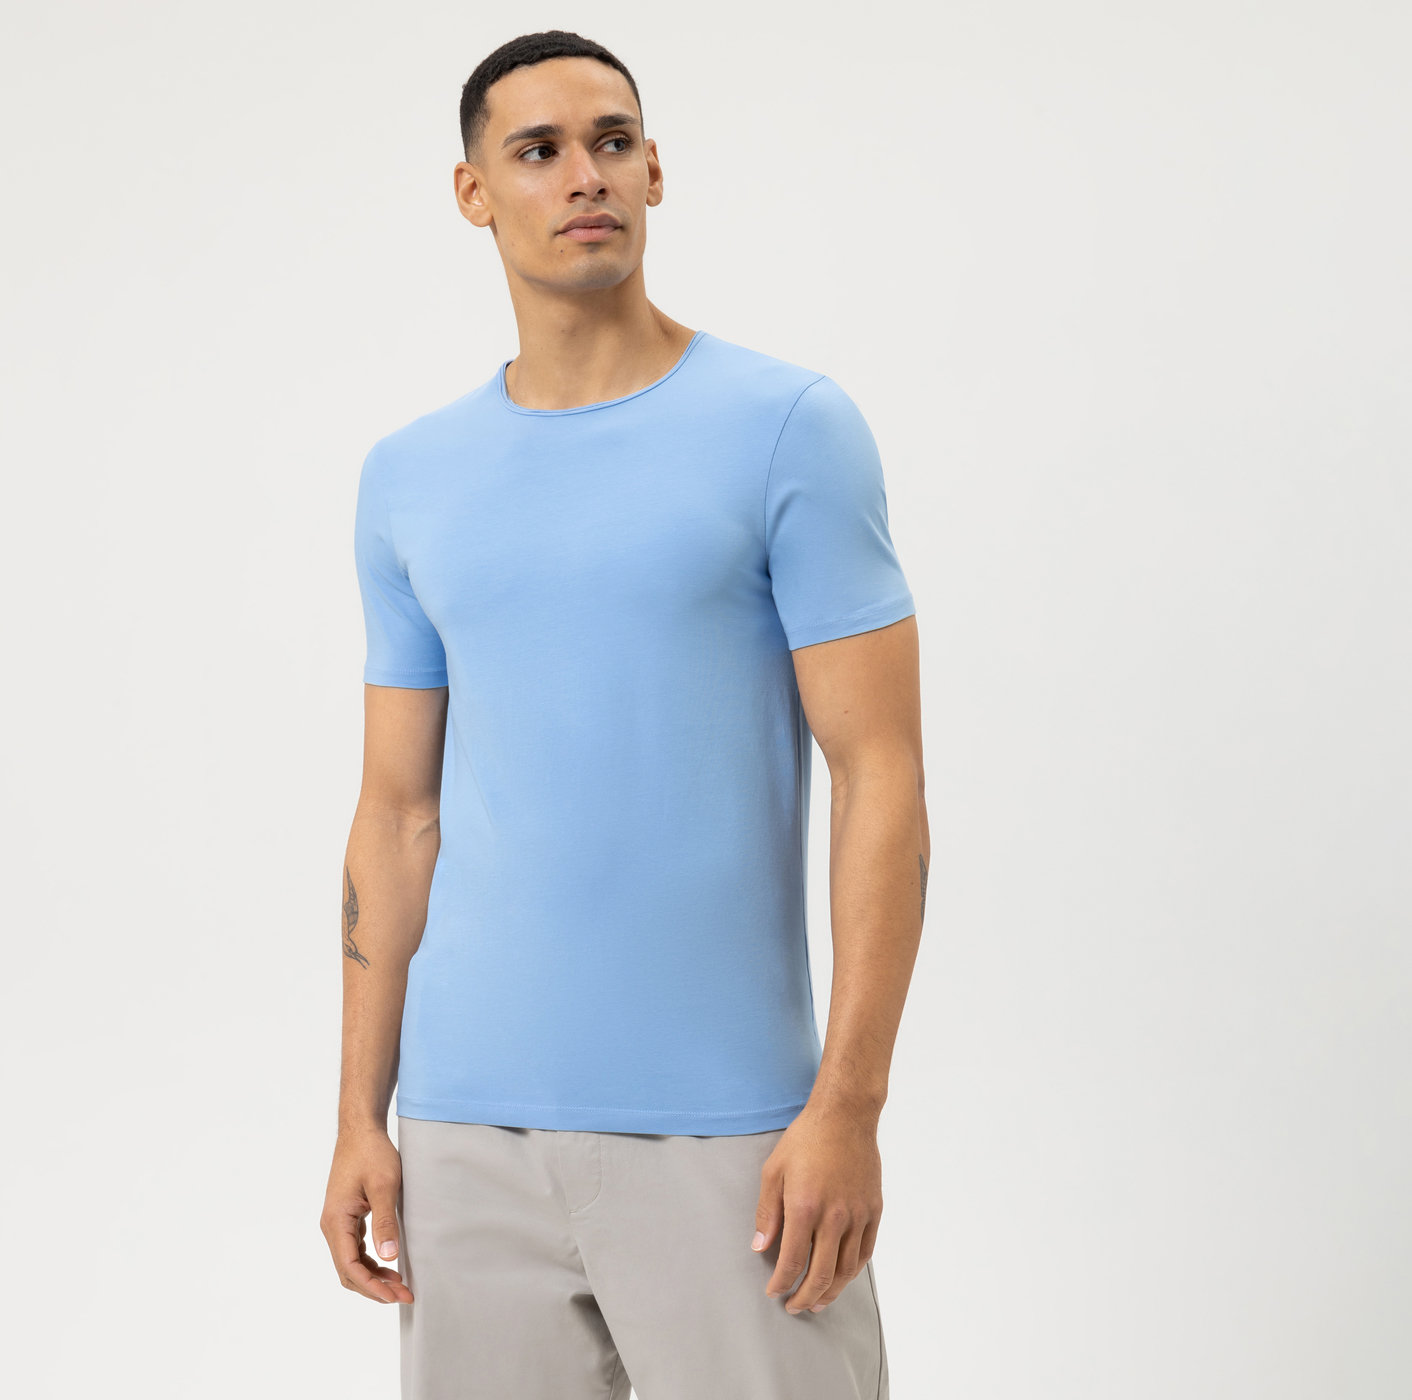 Five - Light T-Shirt, Casual 56603210 body Level , | Blue OLYMP fit